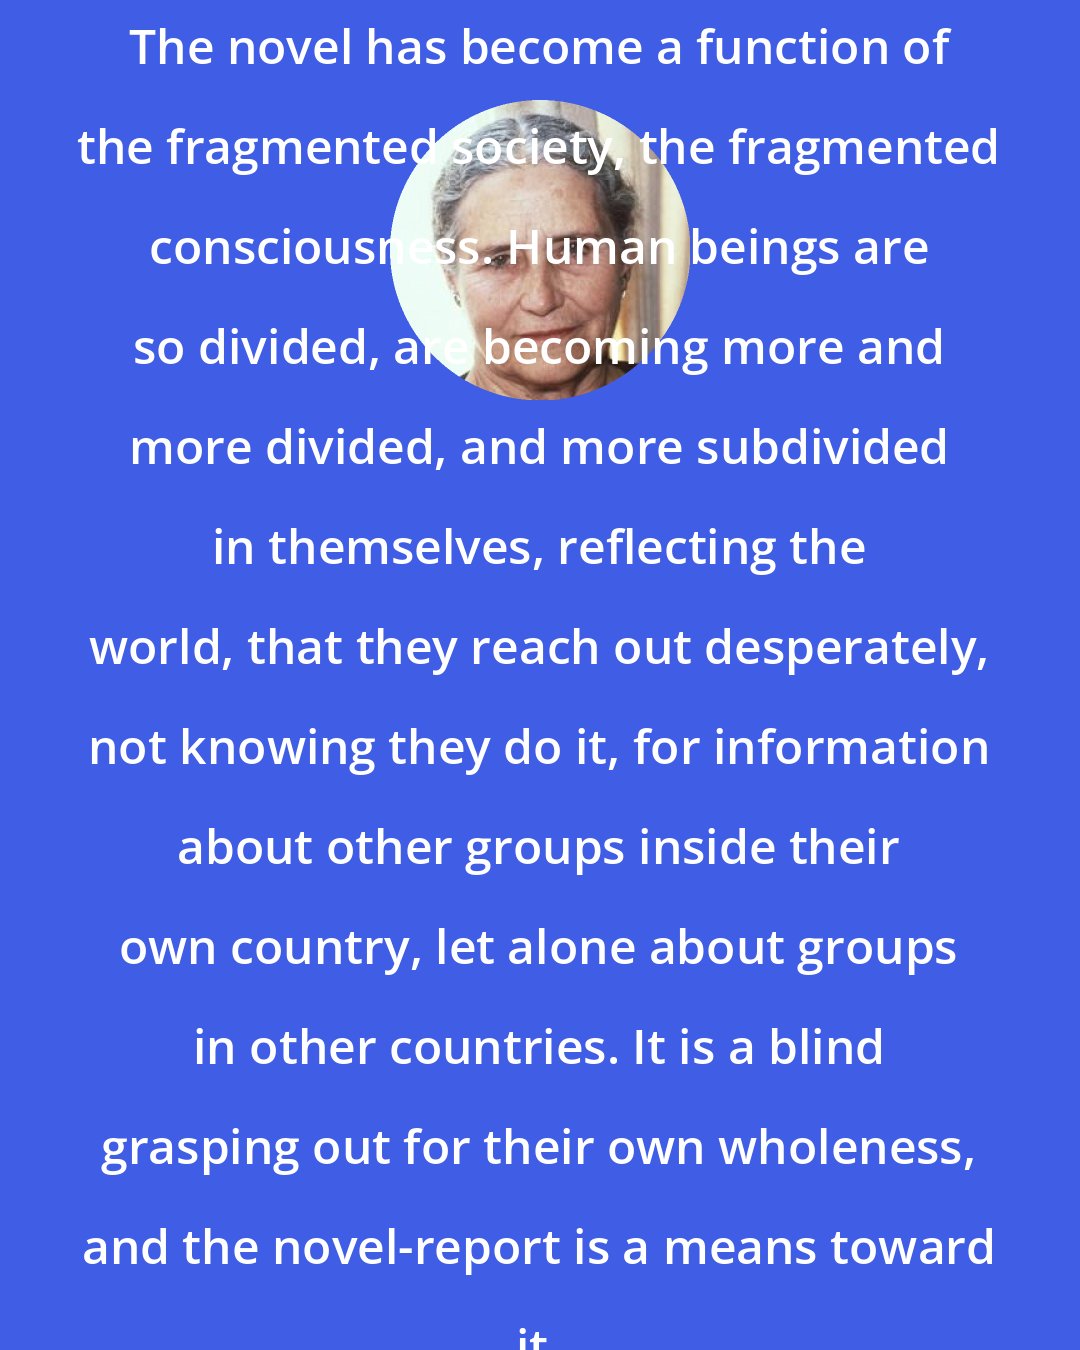 Doris Lessing: The novel has become a function of the fragmented society, the fragmented consciousness. Human beings are so divided, are becoming more and more divided, and more subdivided in themselves, reflecting the world, that they reach out desperately, not knowing they do it, for information about other groups inside their own country, let alone about groups in other countries. It is a blind grasping out for their own wholeness, and the novel-report is a means toward it.